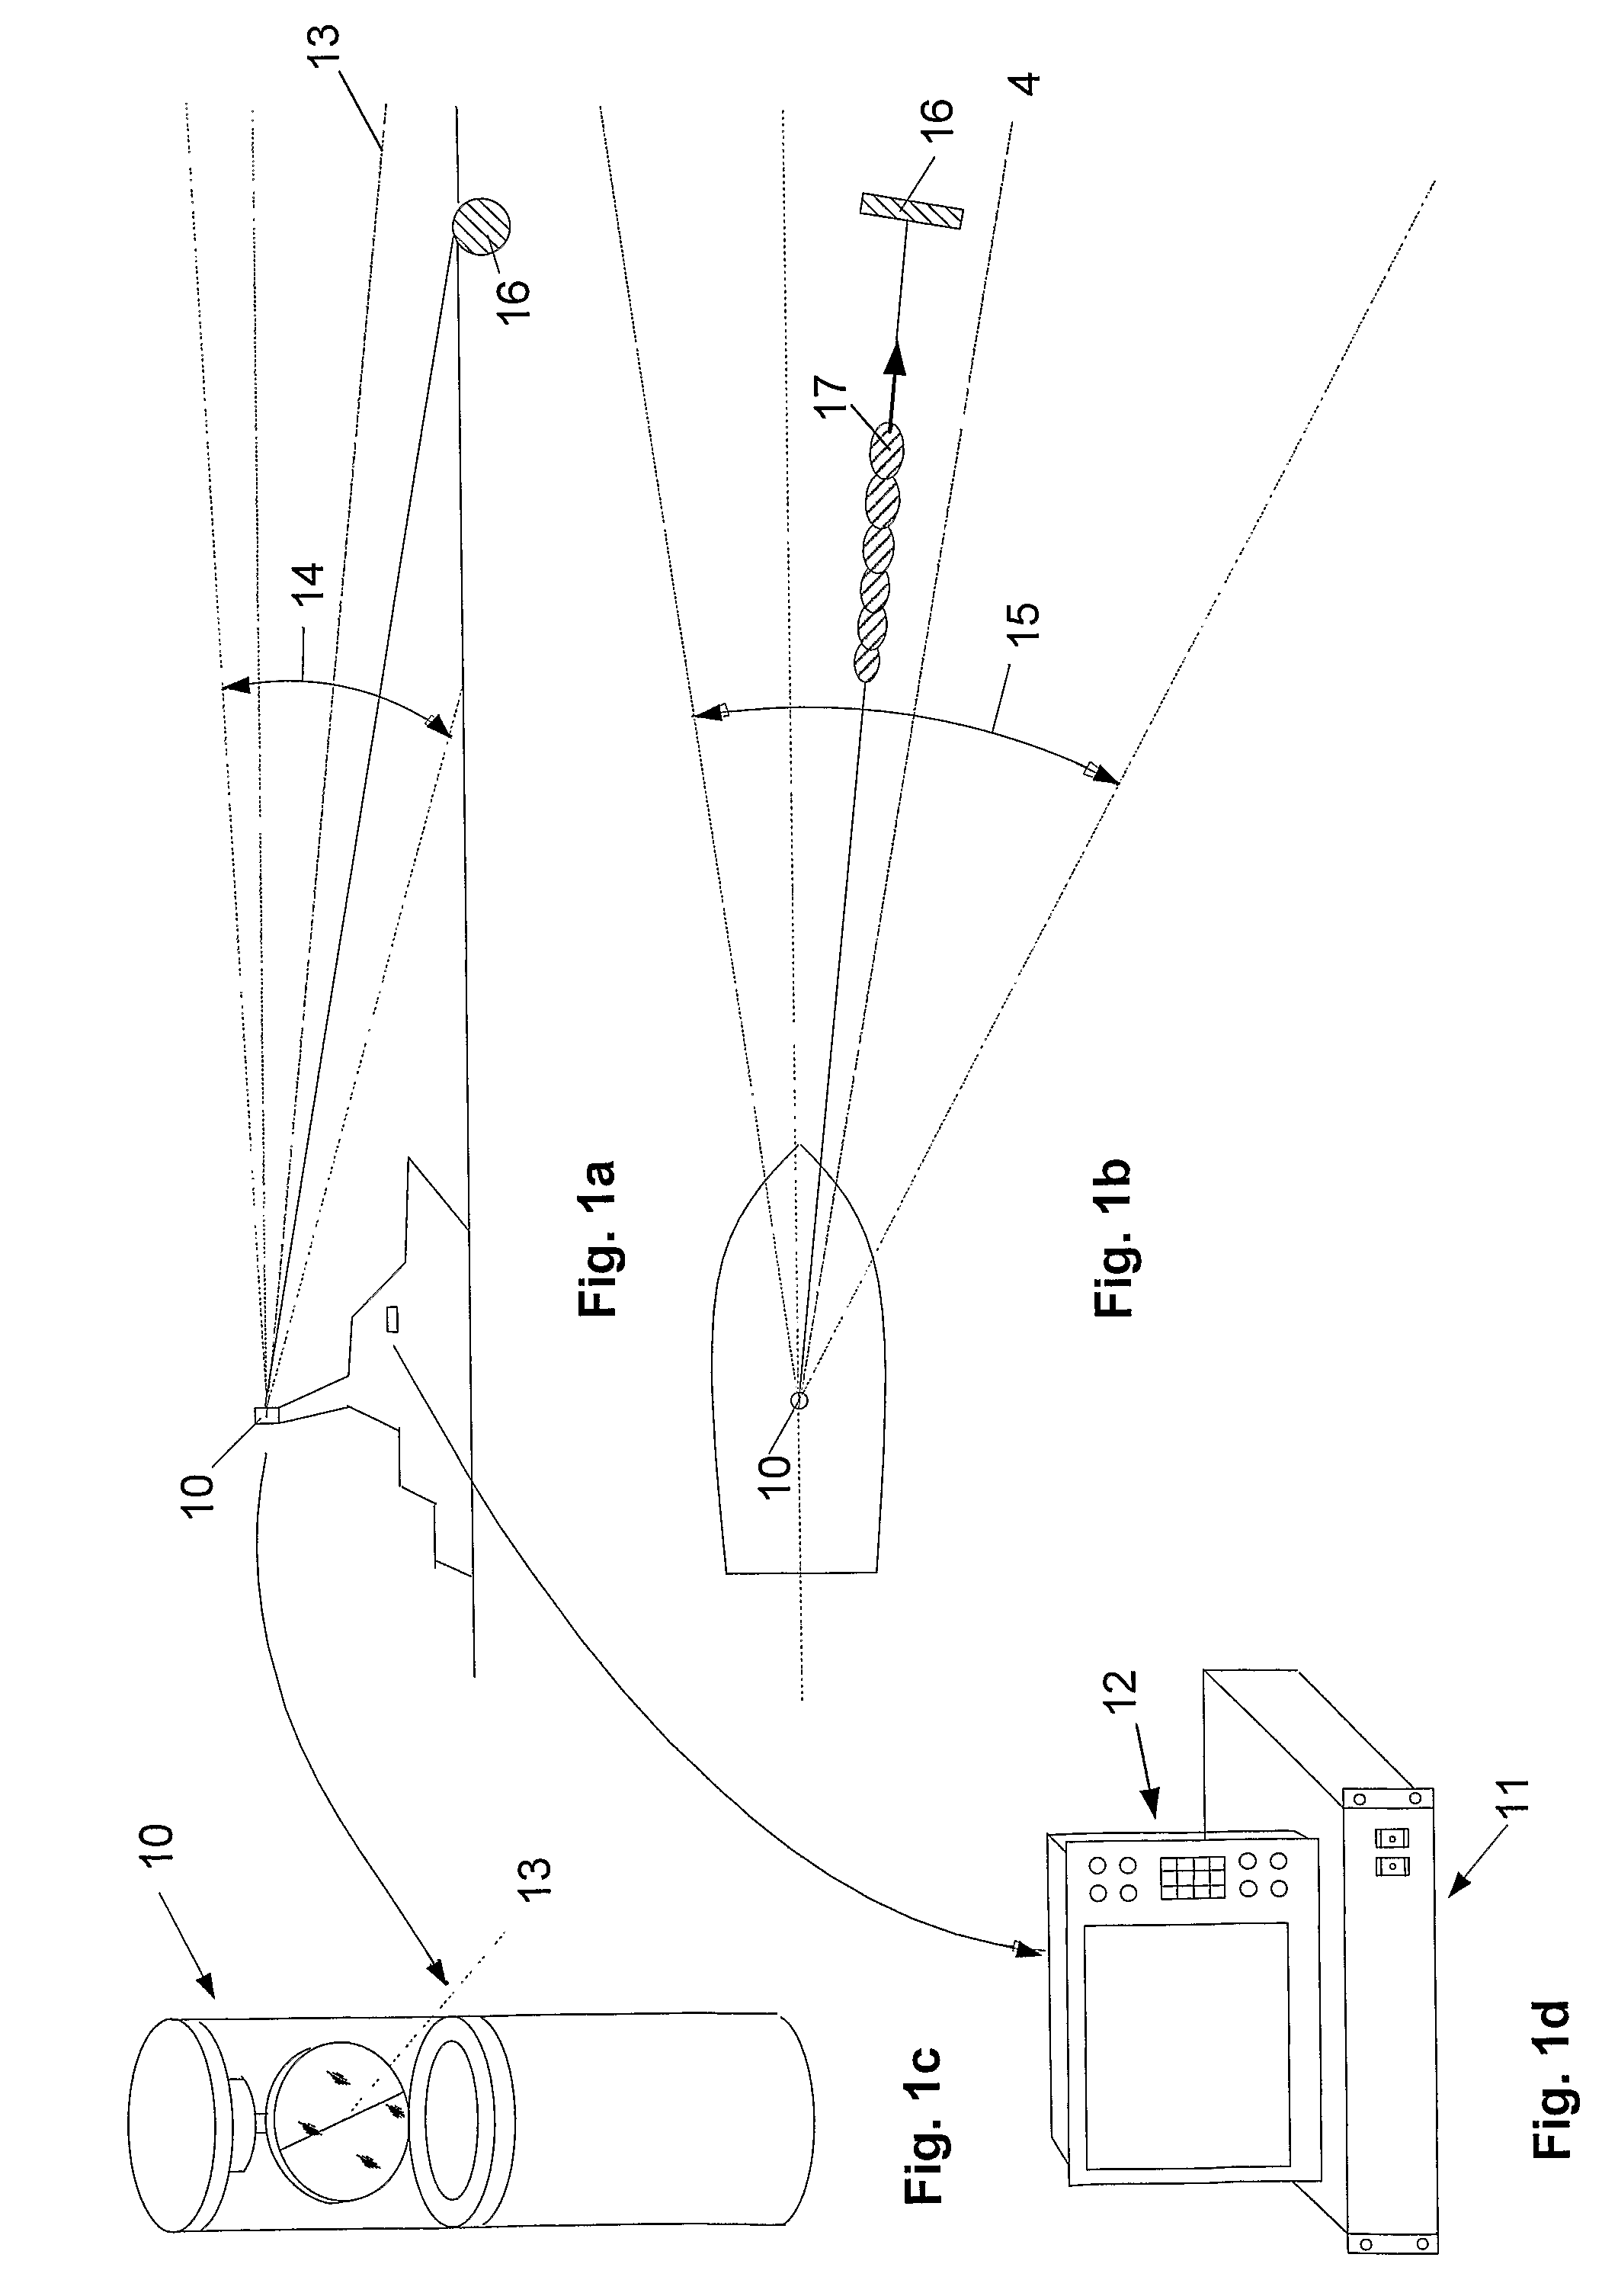 System for the detection and the depiction of objects in the path of marine vessels